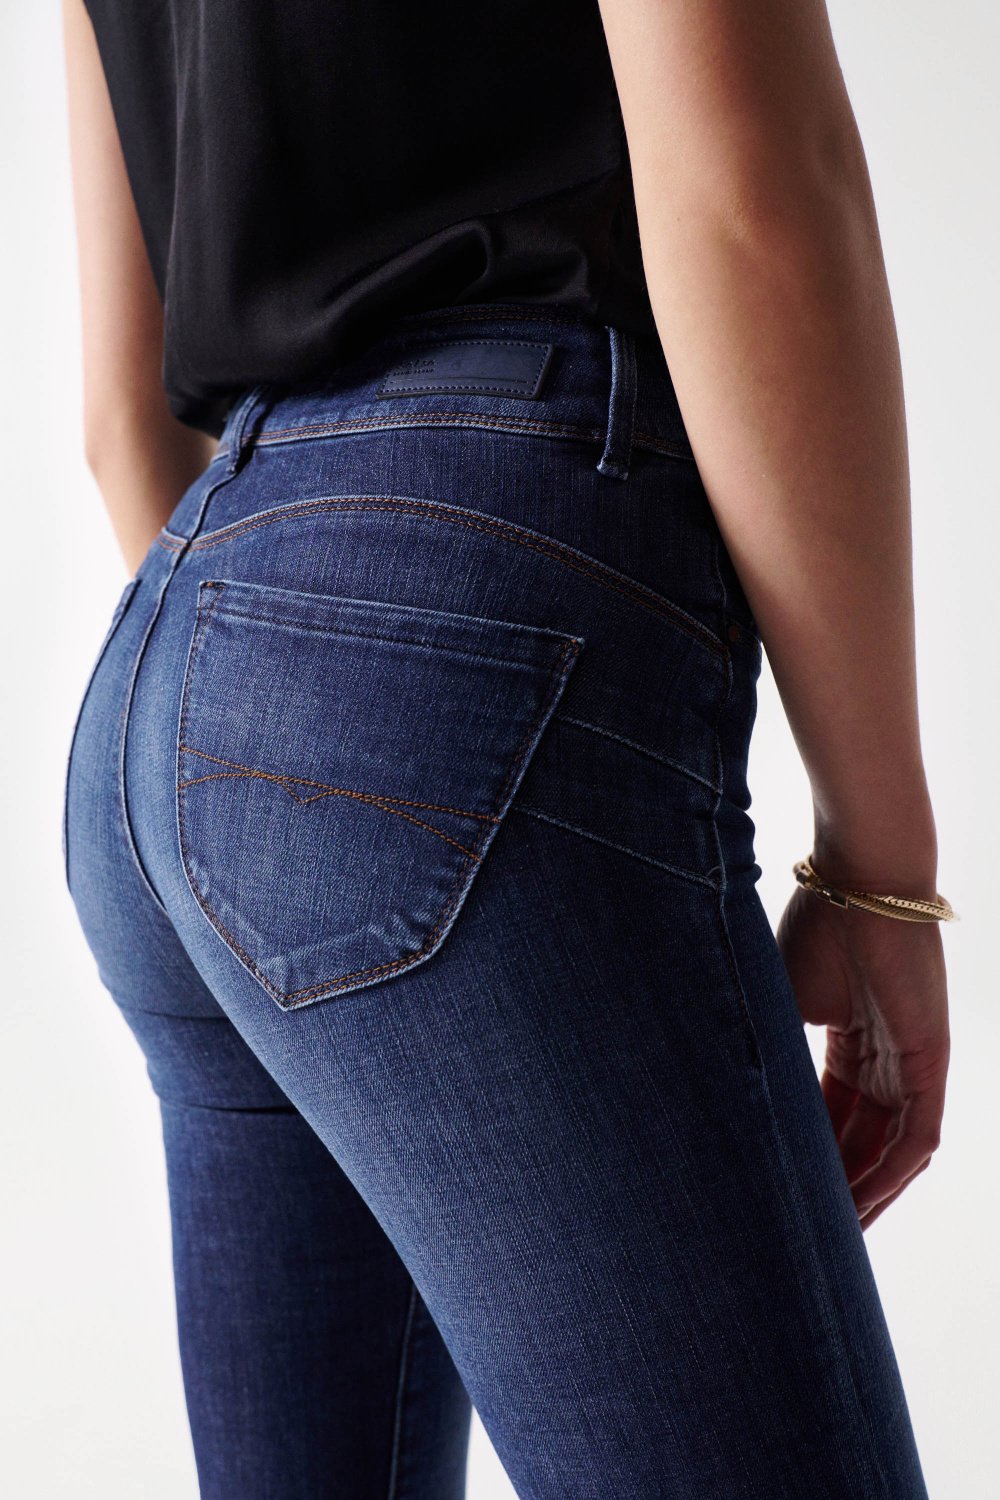 PUSH IN SECRET SLIM JEANS WITH RINSED EFFECT - Salsa